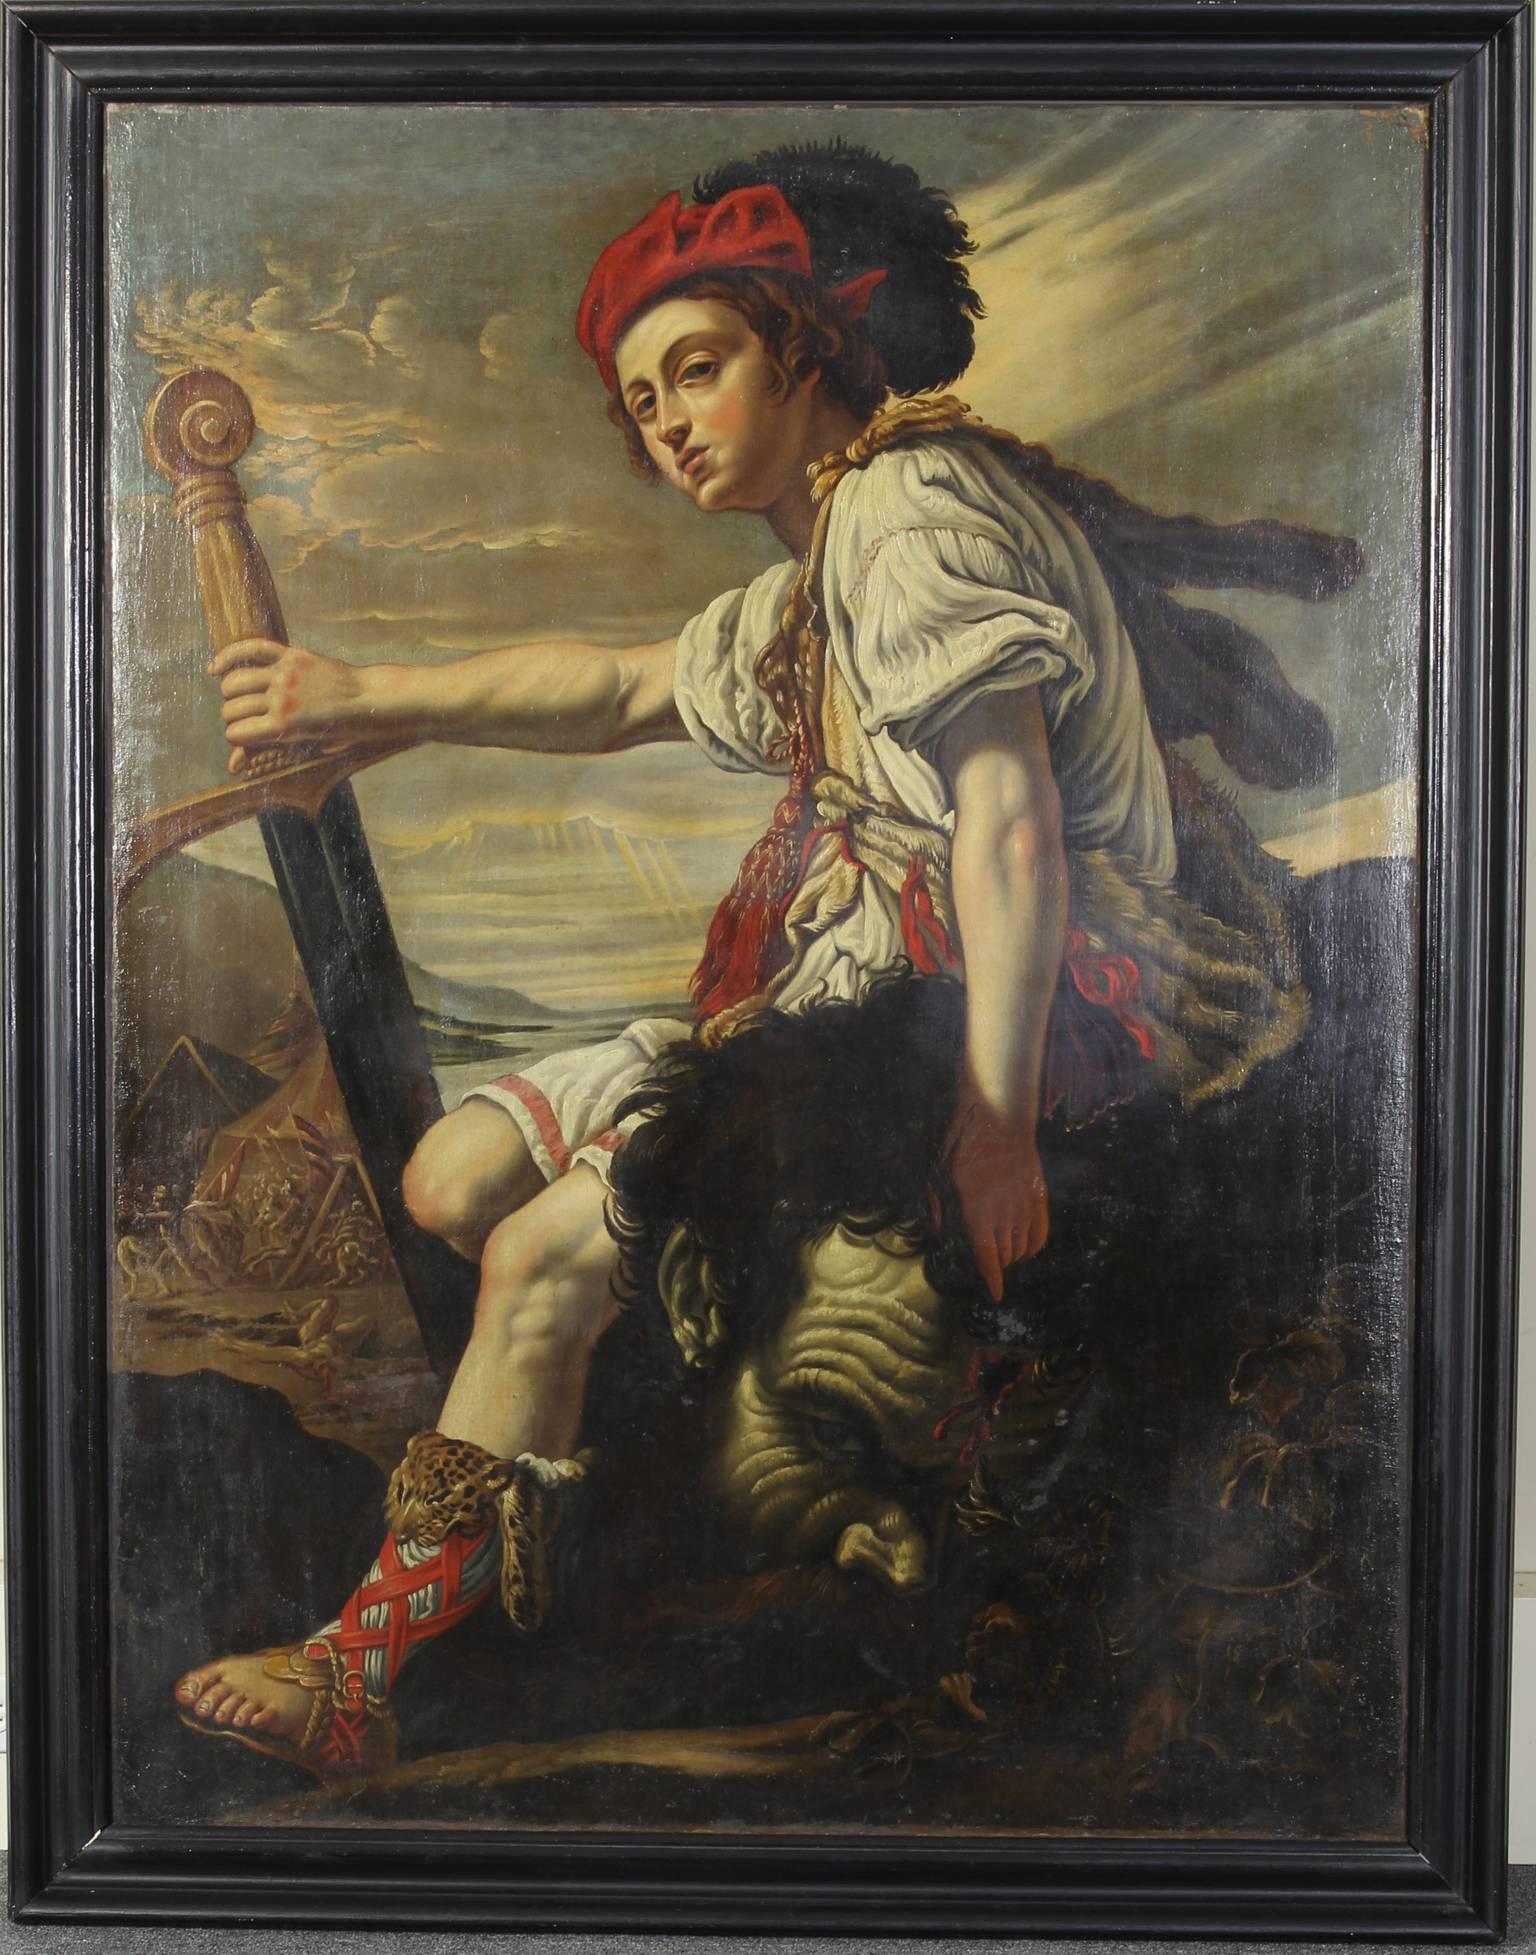 A large and dramatic 19th century oil on canvas portrait of David with the head of Goliath after the Italian Baroque master Domenico Fetti.